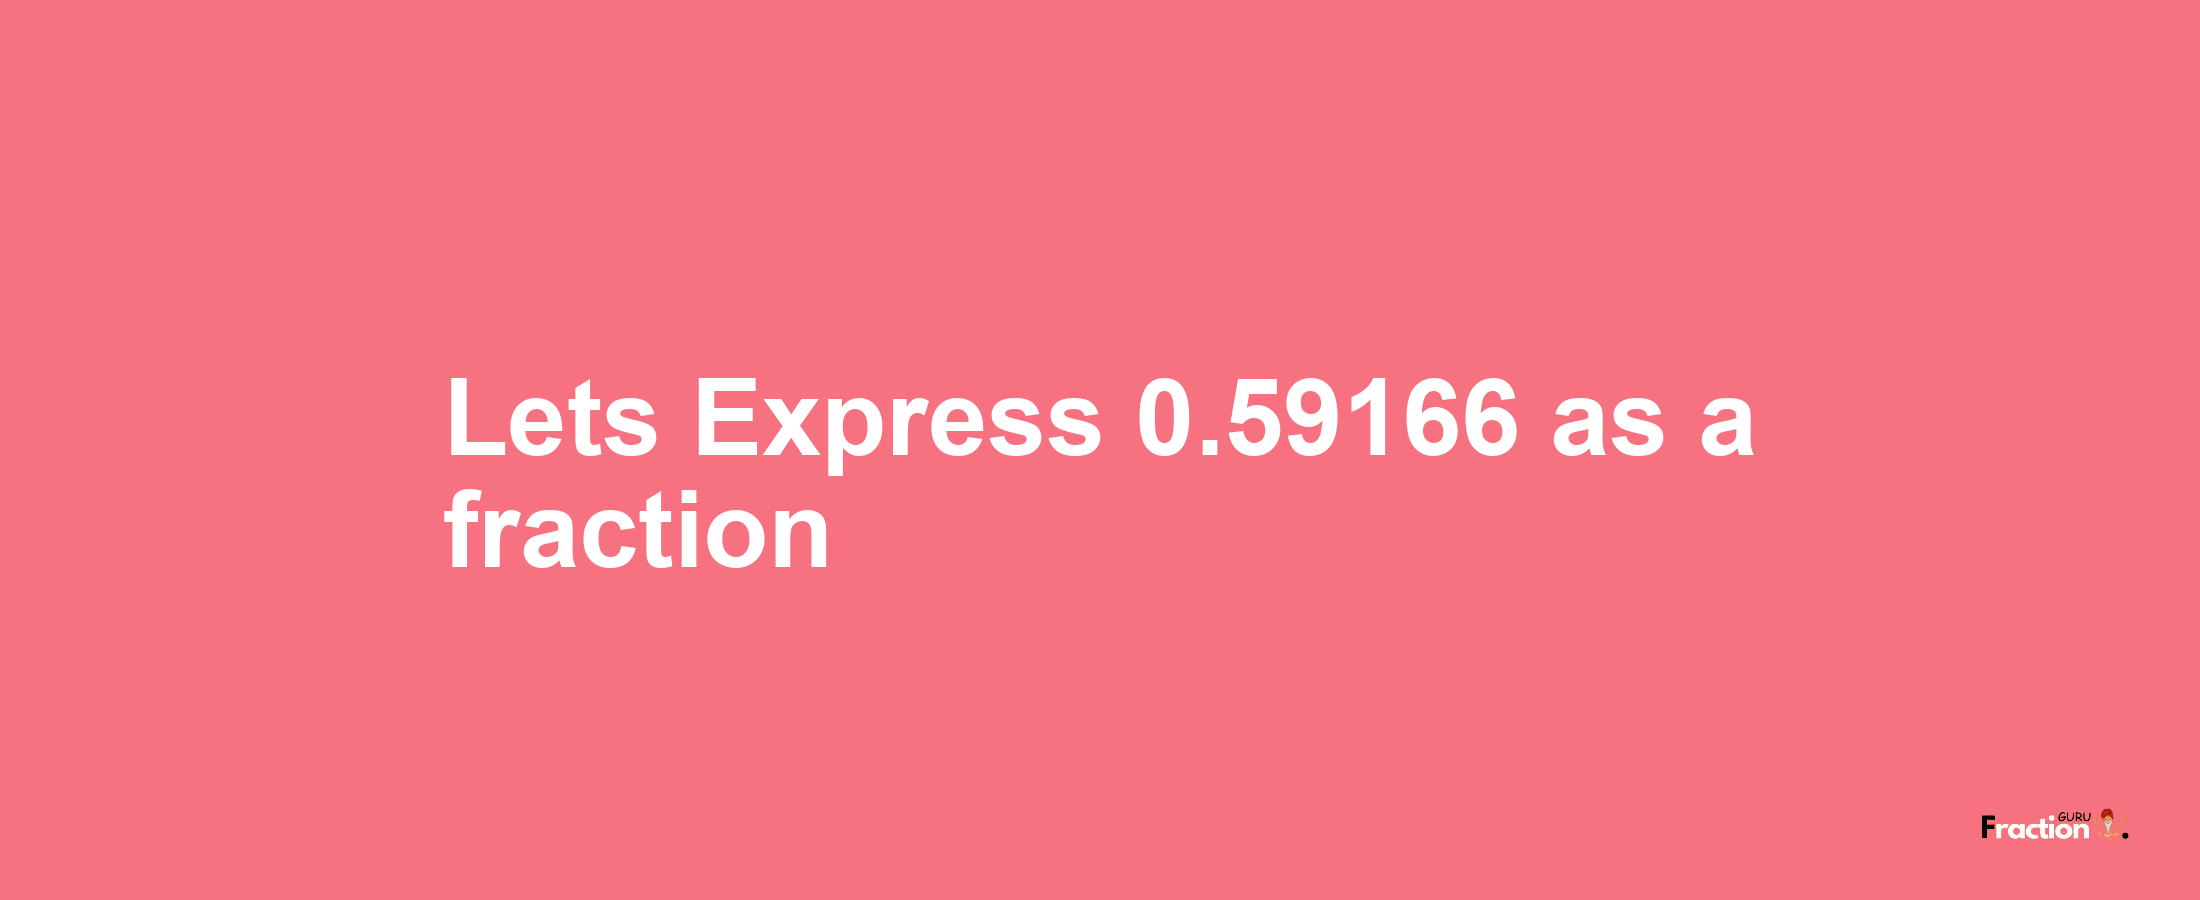 Lets Express 0.59166 as afraction